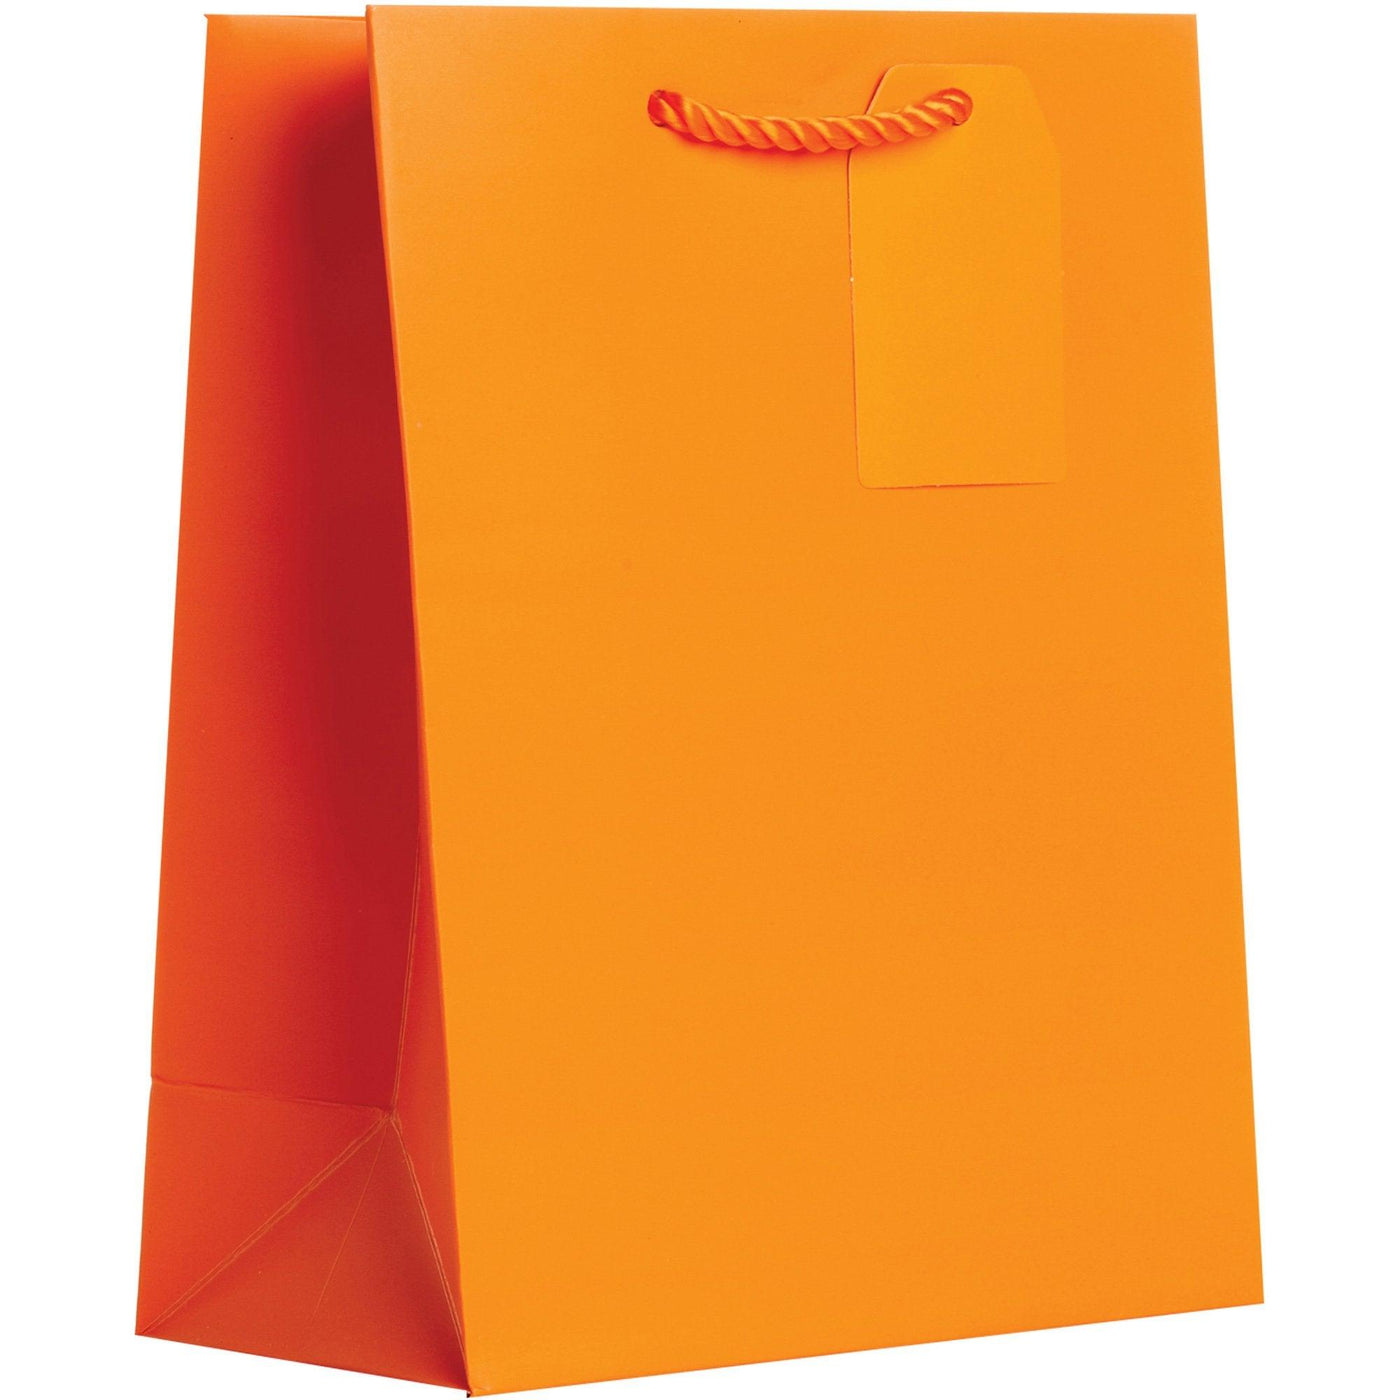 Heavyweight Solid Color Medium Gift Bags, Matte Orange by Present Paper - Vysn